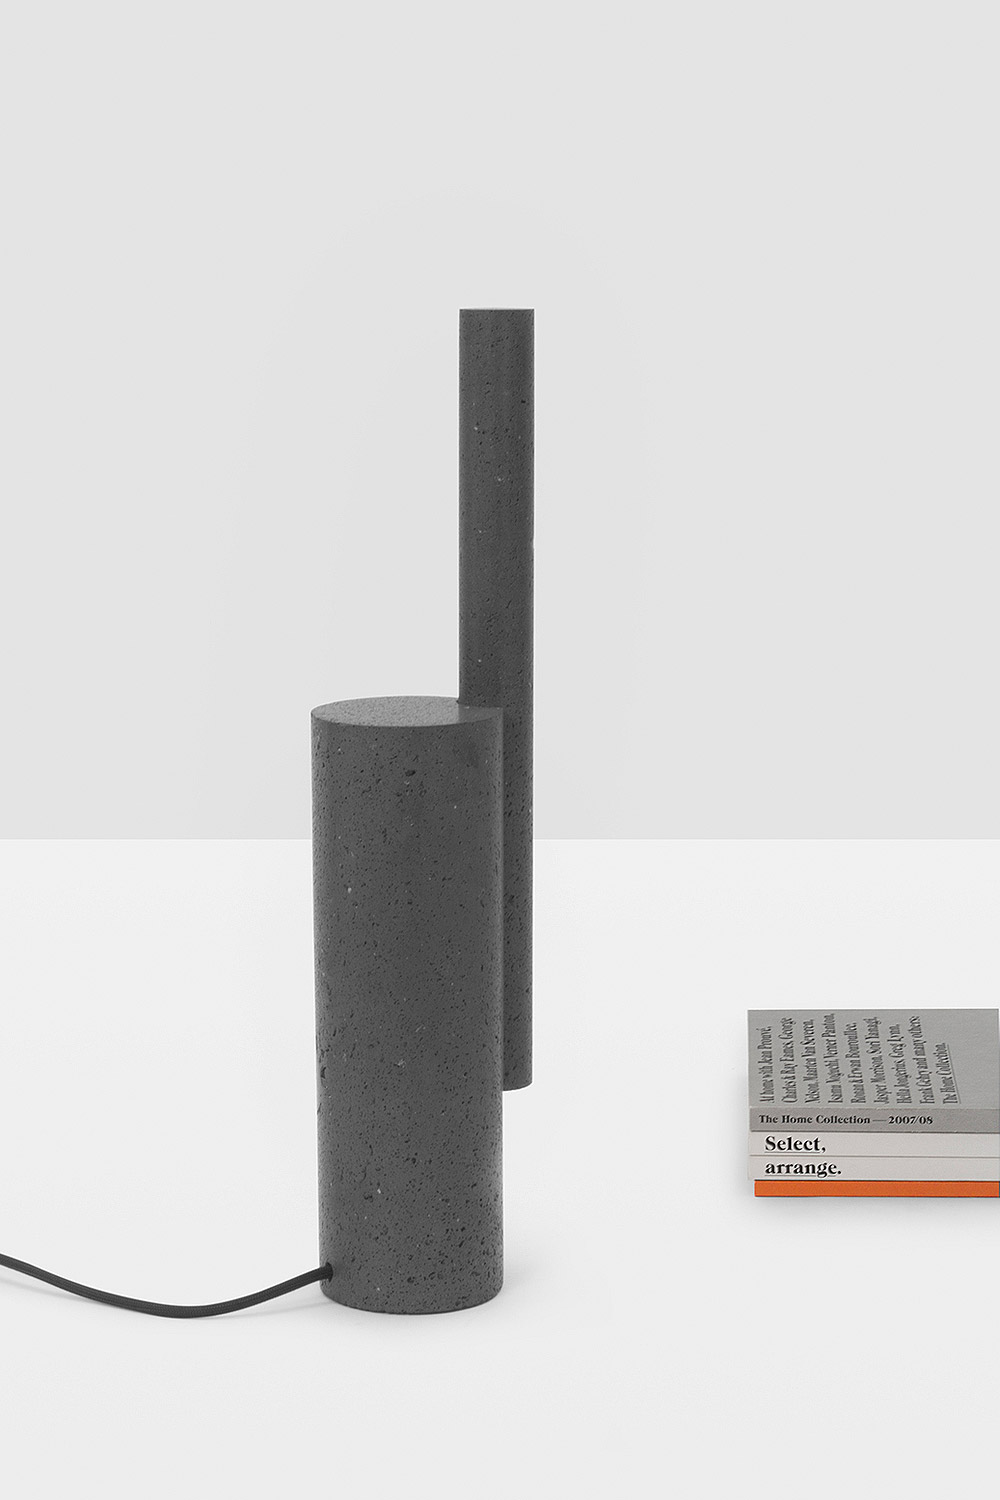 Drill Lamps by LeviSarha - Minimalist Table Lamp made of basalt, a volcanic stone | Aesence